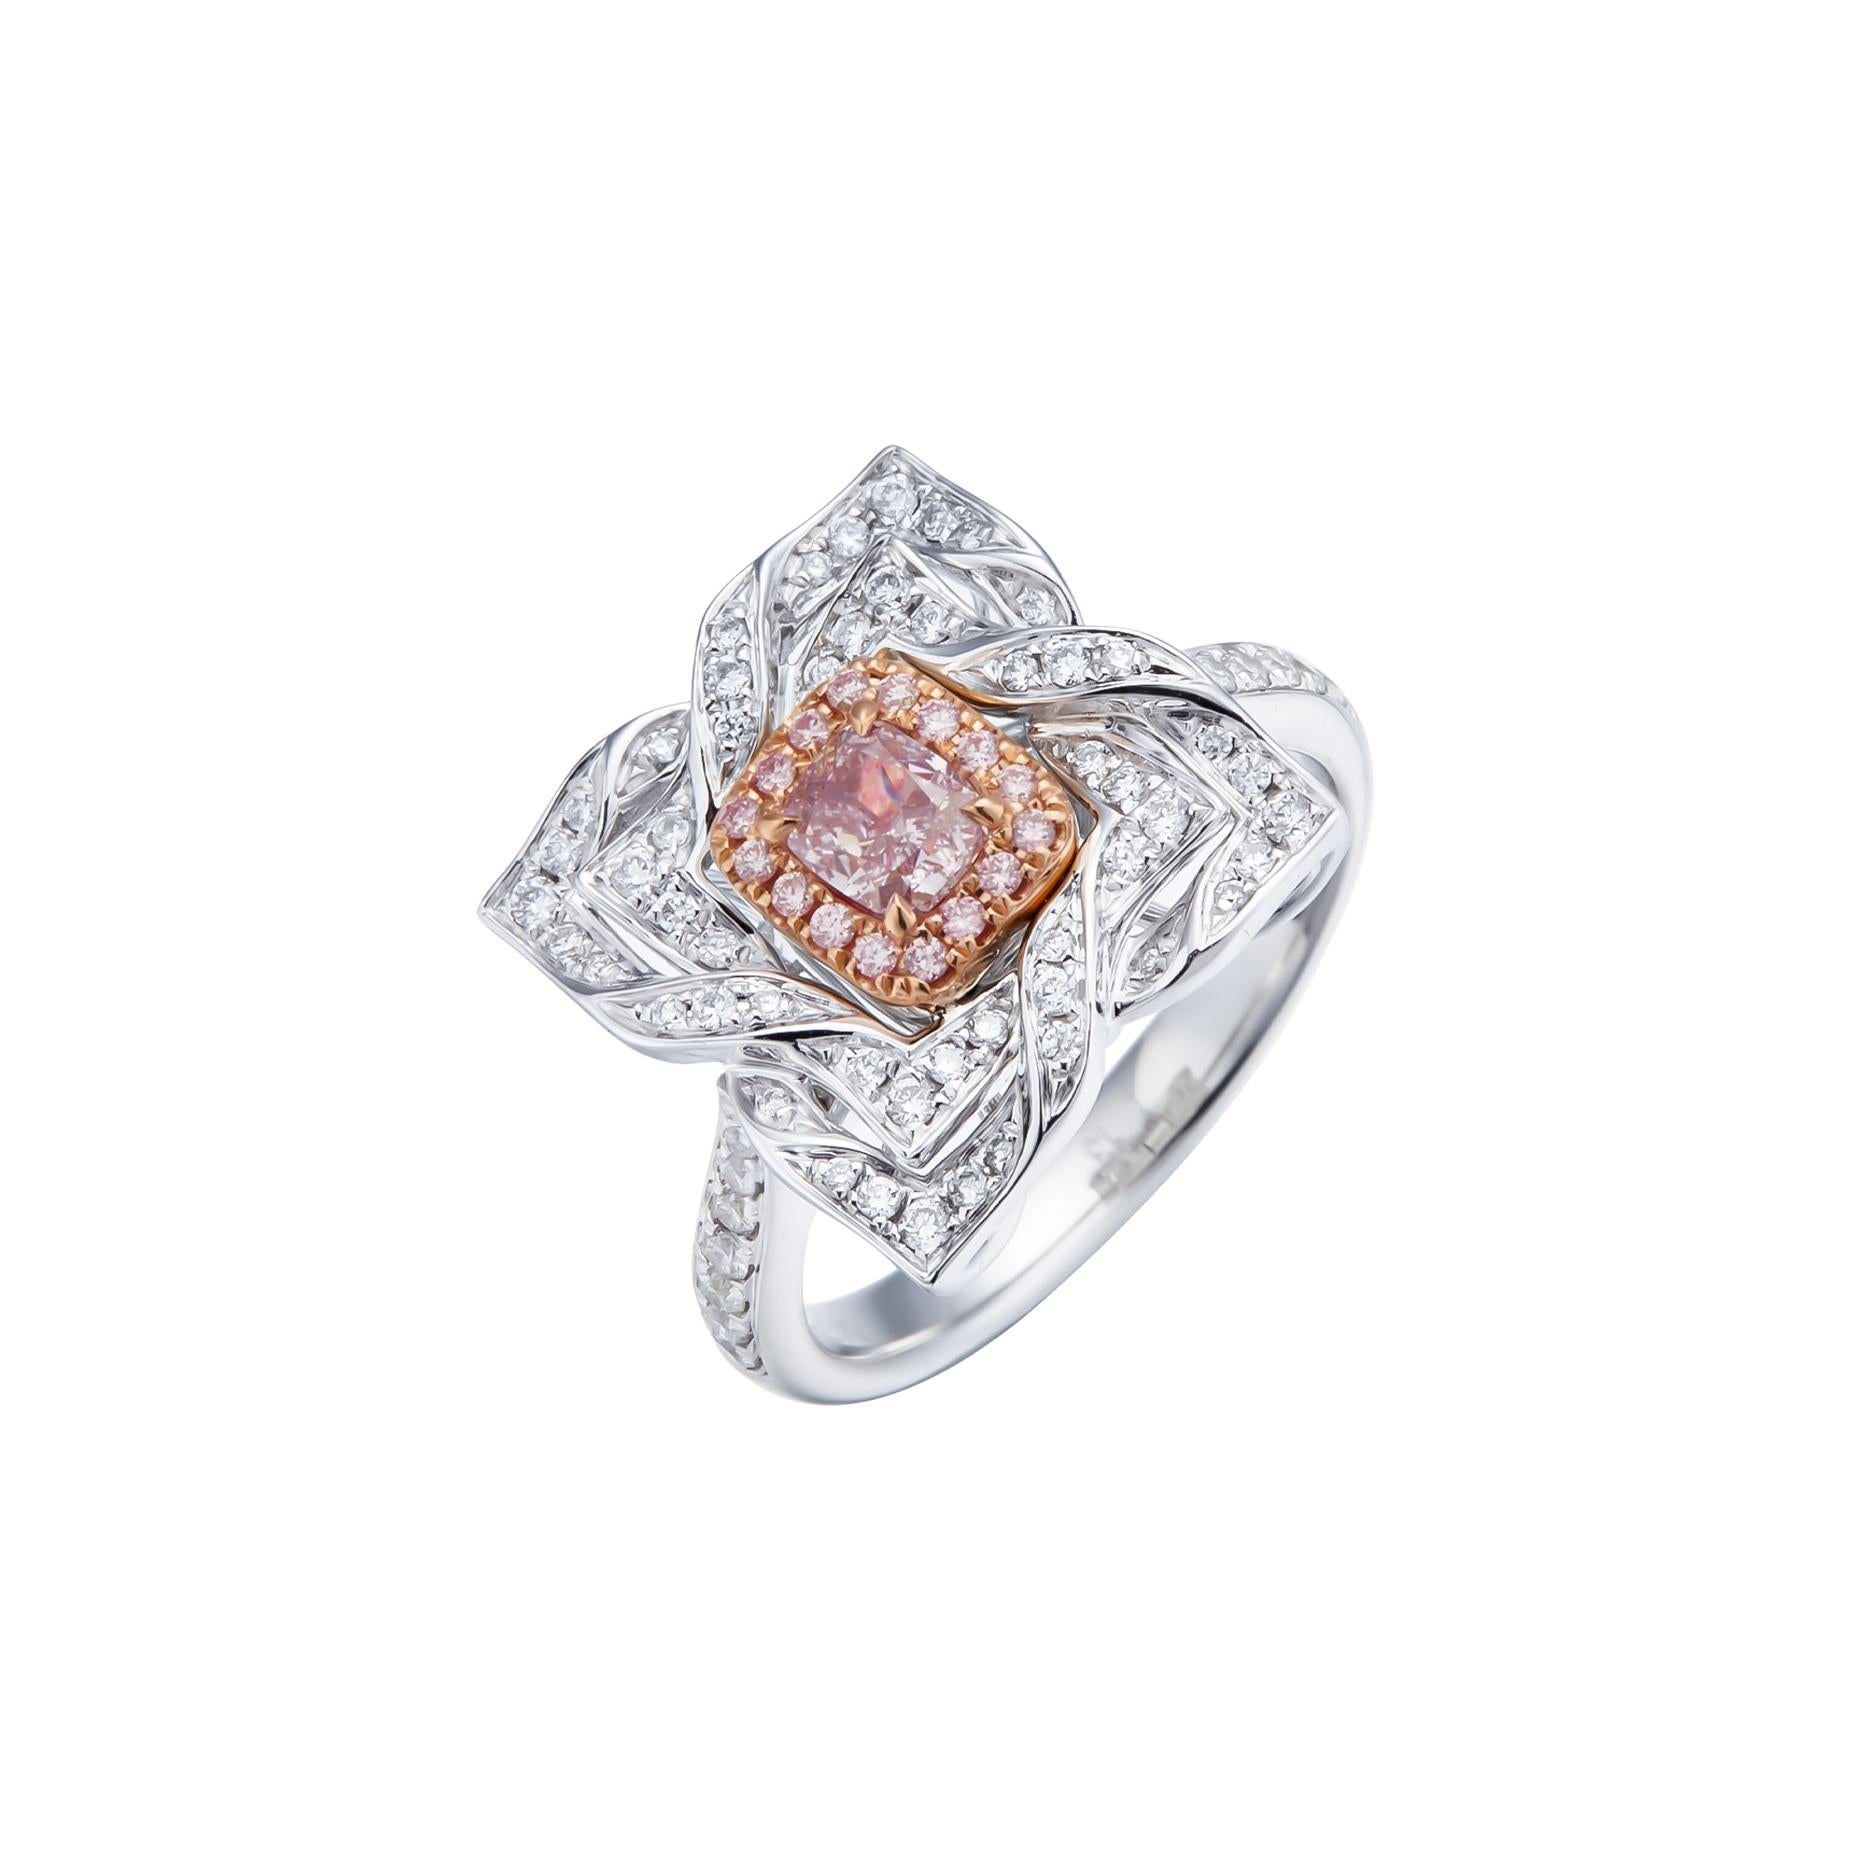 0.37ct Natural Fancy Light Pink Cushion Shape Diamond Ring, a true marvel of nature, carefully set in 18kt gold. This ring is a celebration of elegance and sophistication, with a dash of rare and charming pink.

At the heart of this masterpiece is a